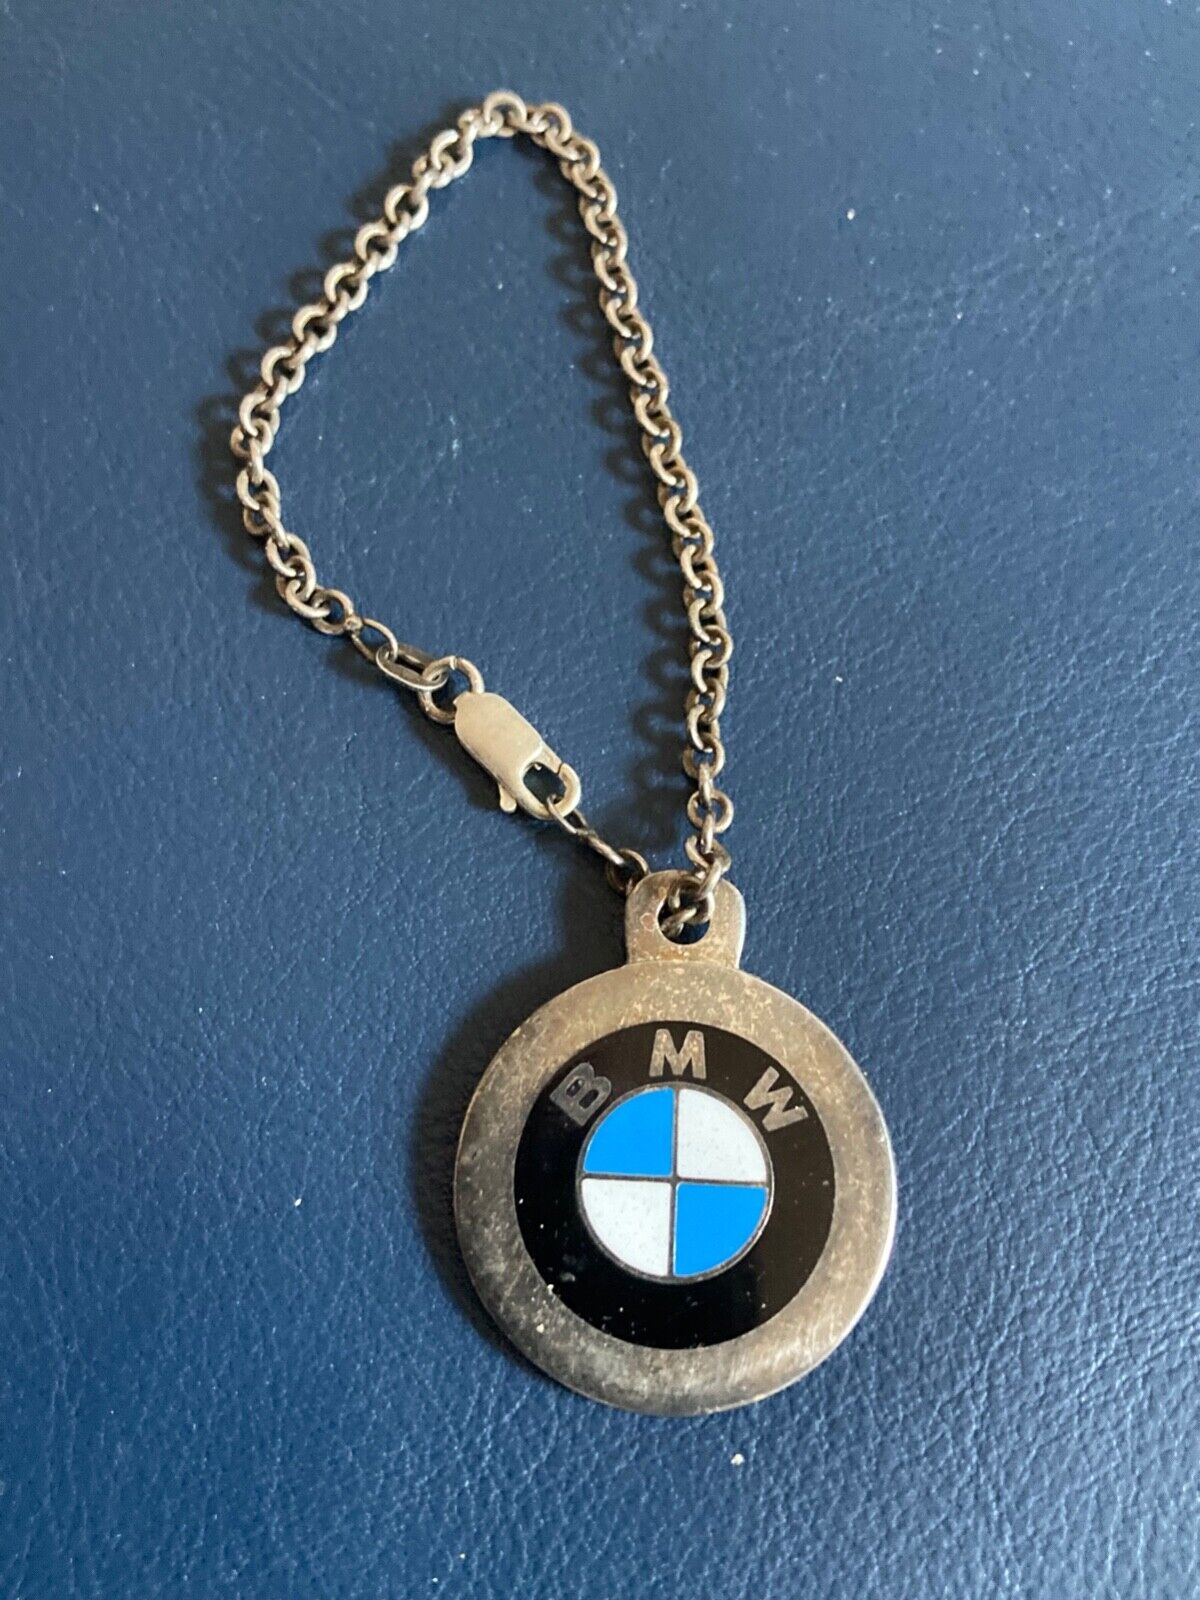 RARE VINTAGE NEW STERLING SILVER BMW KEYCHAIN: Stunning SILVER 1980's